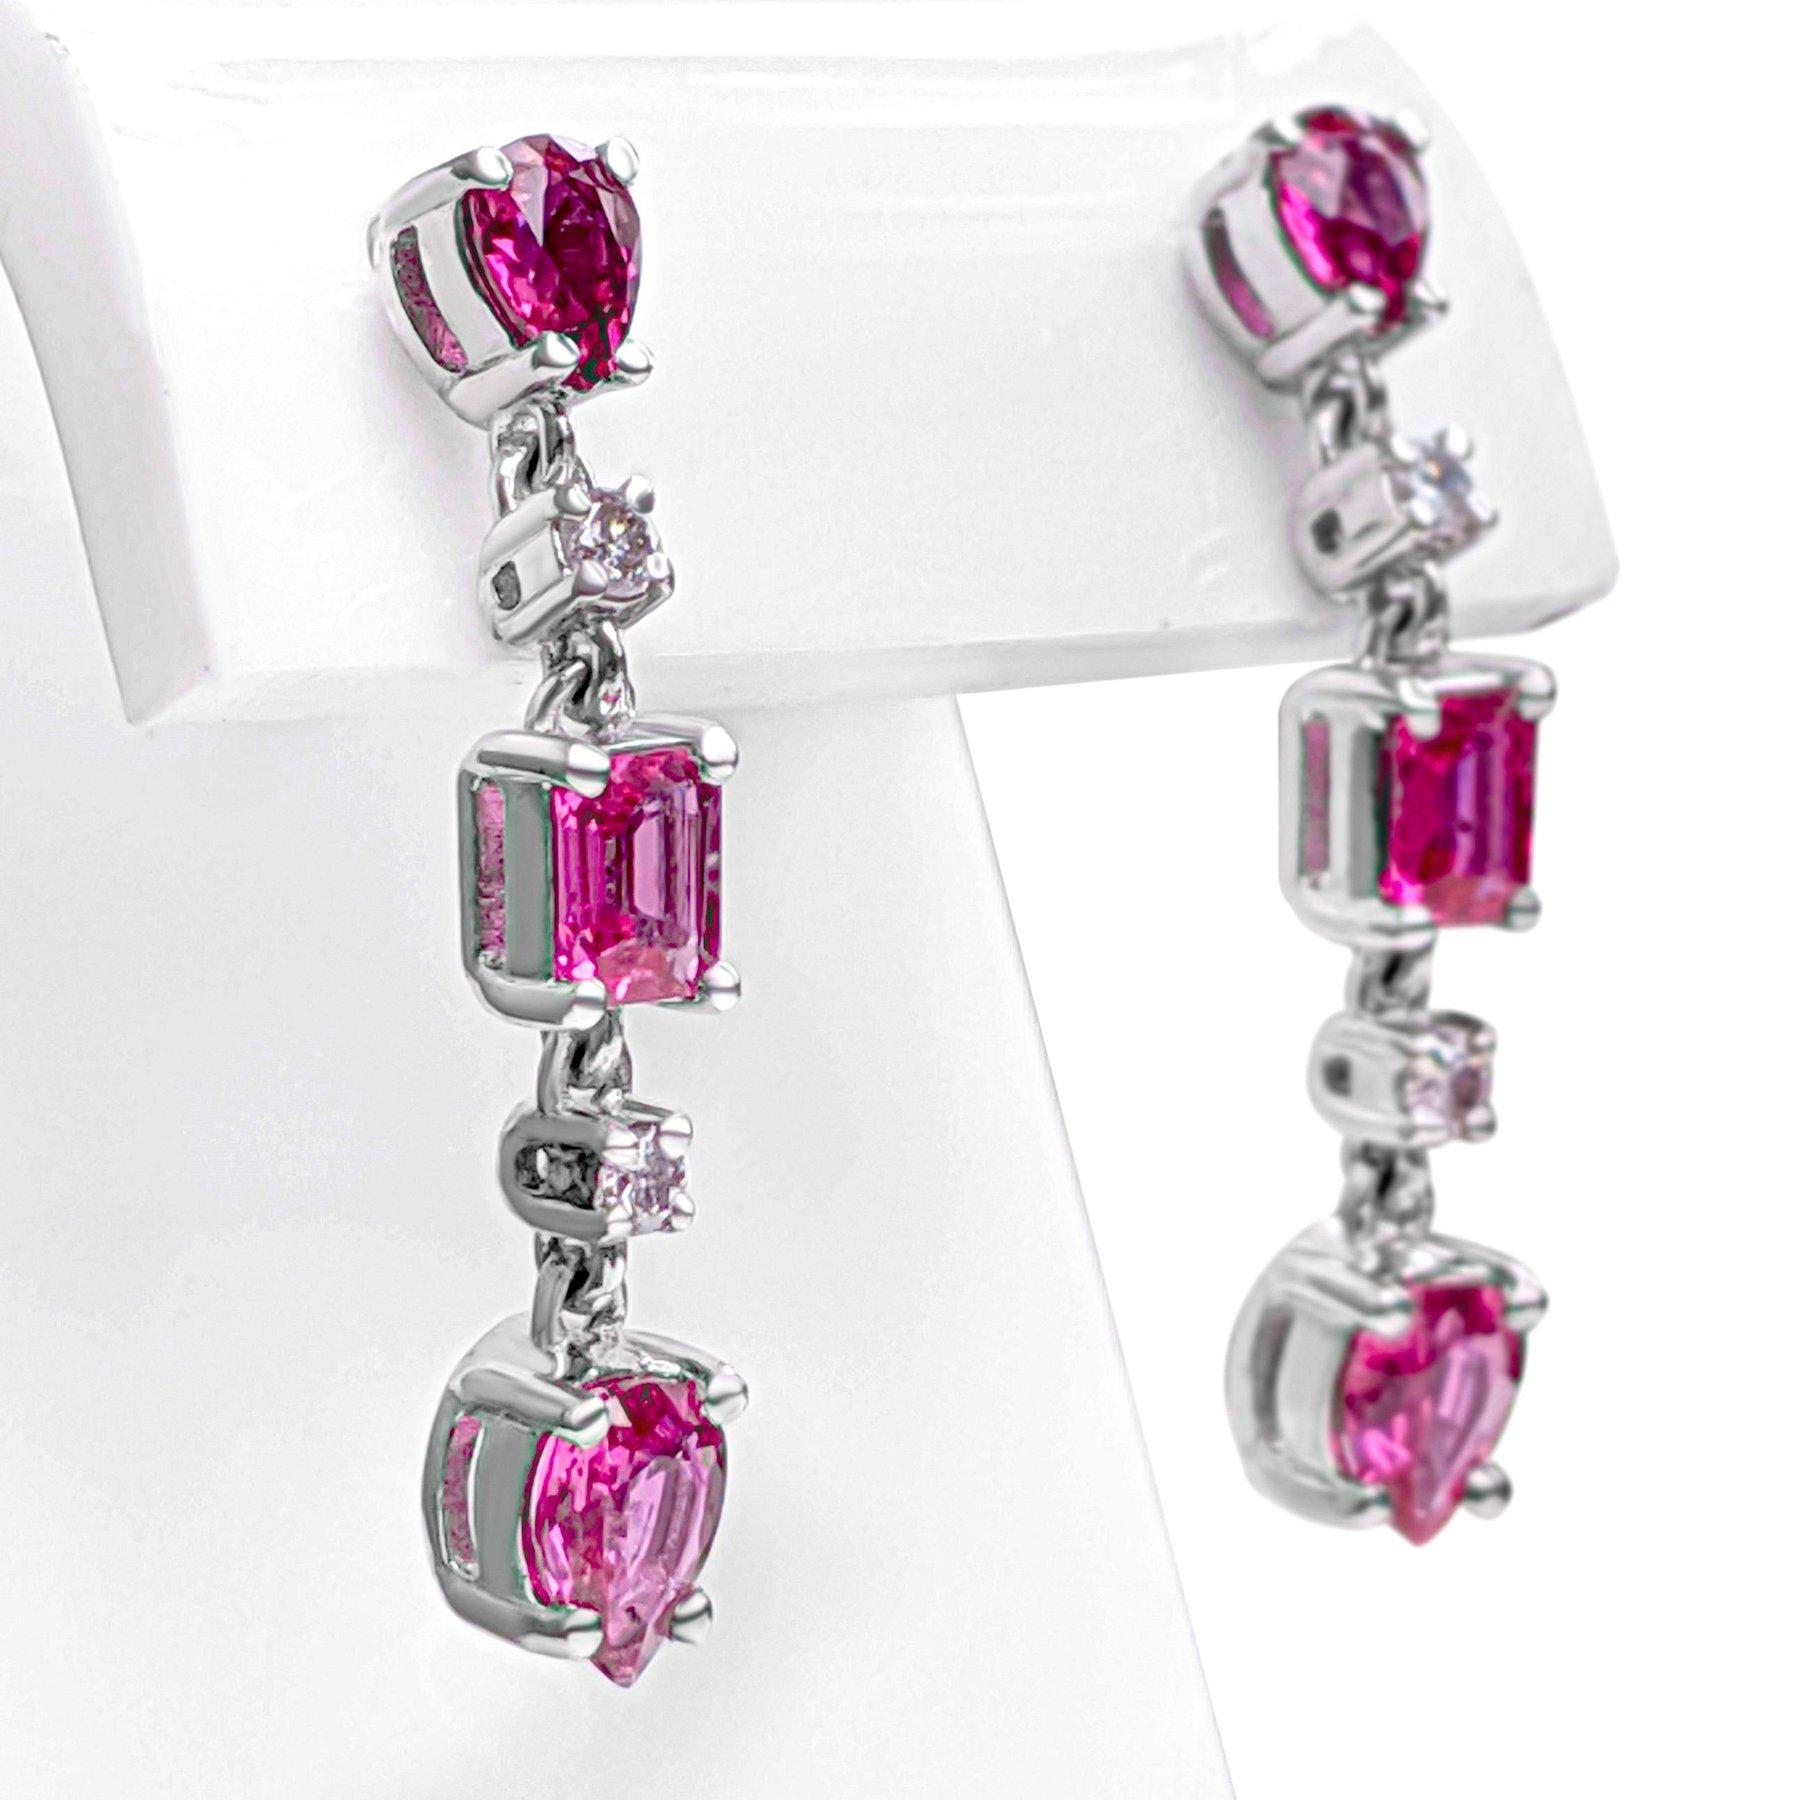 Women's NO RESERVE! 1.23cttw NO HEAT Ruby & 0.08Ct Diamonds 14K White Gold Earrings For Sale